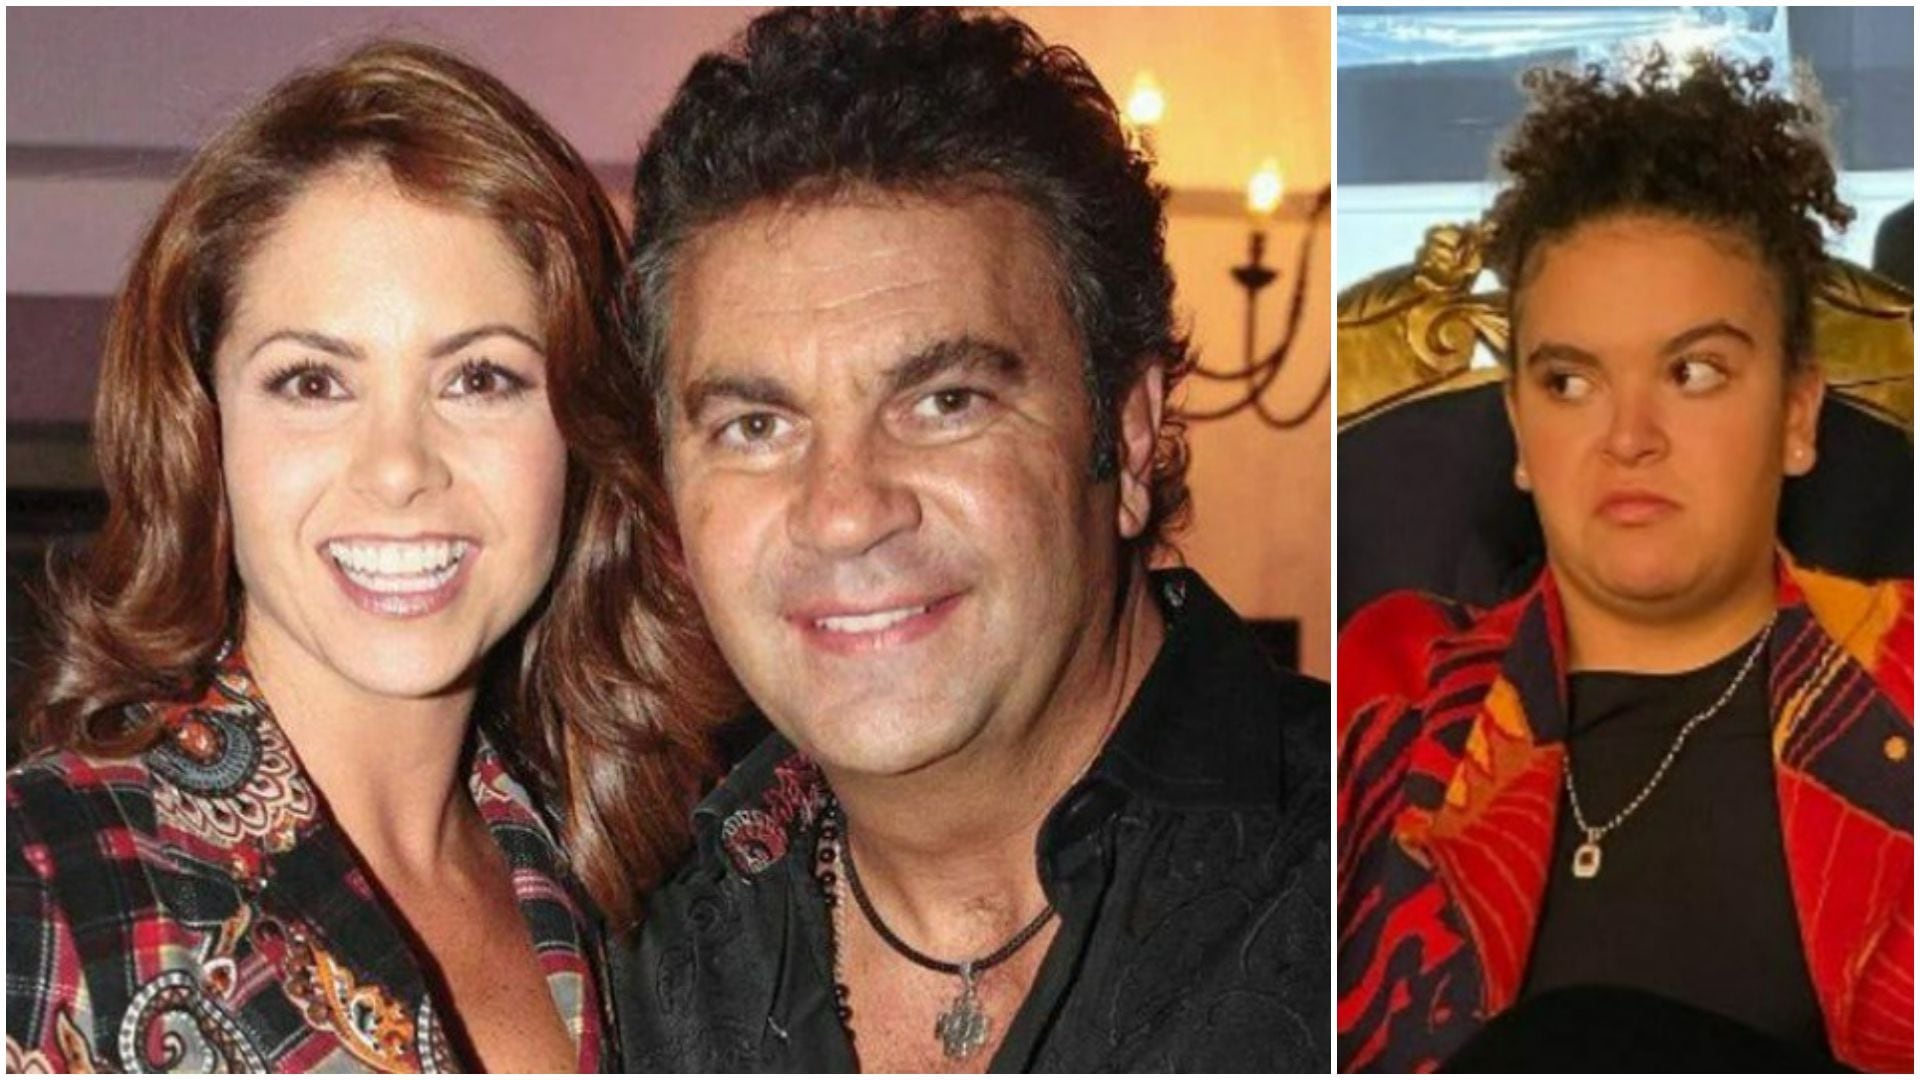 Lucerito Mijares, 'La Beba', has said that it would seem very 'strange' to see his parents together again (Instagram)